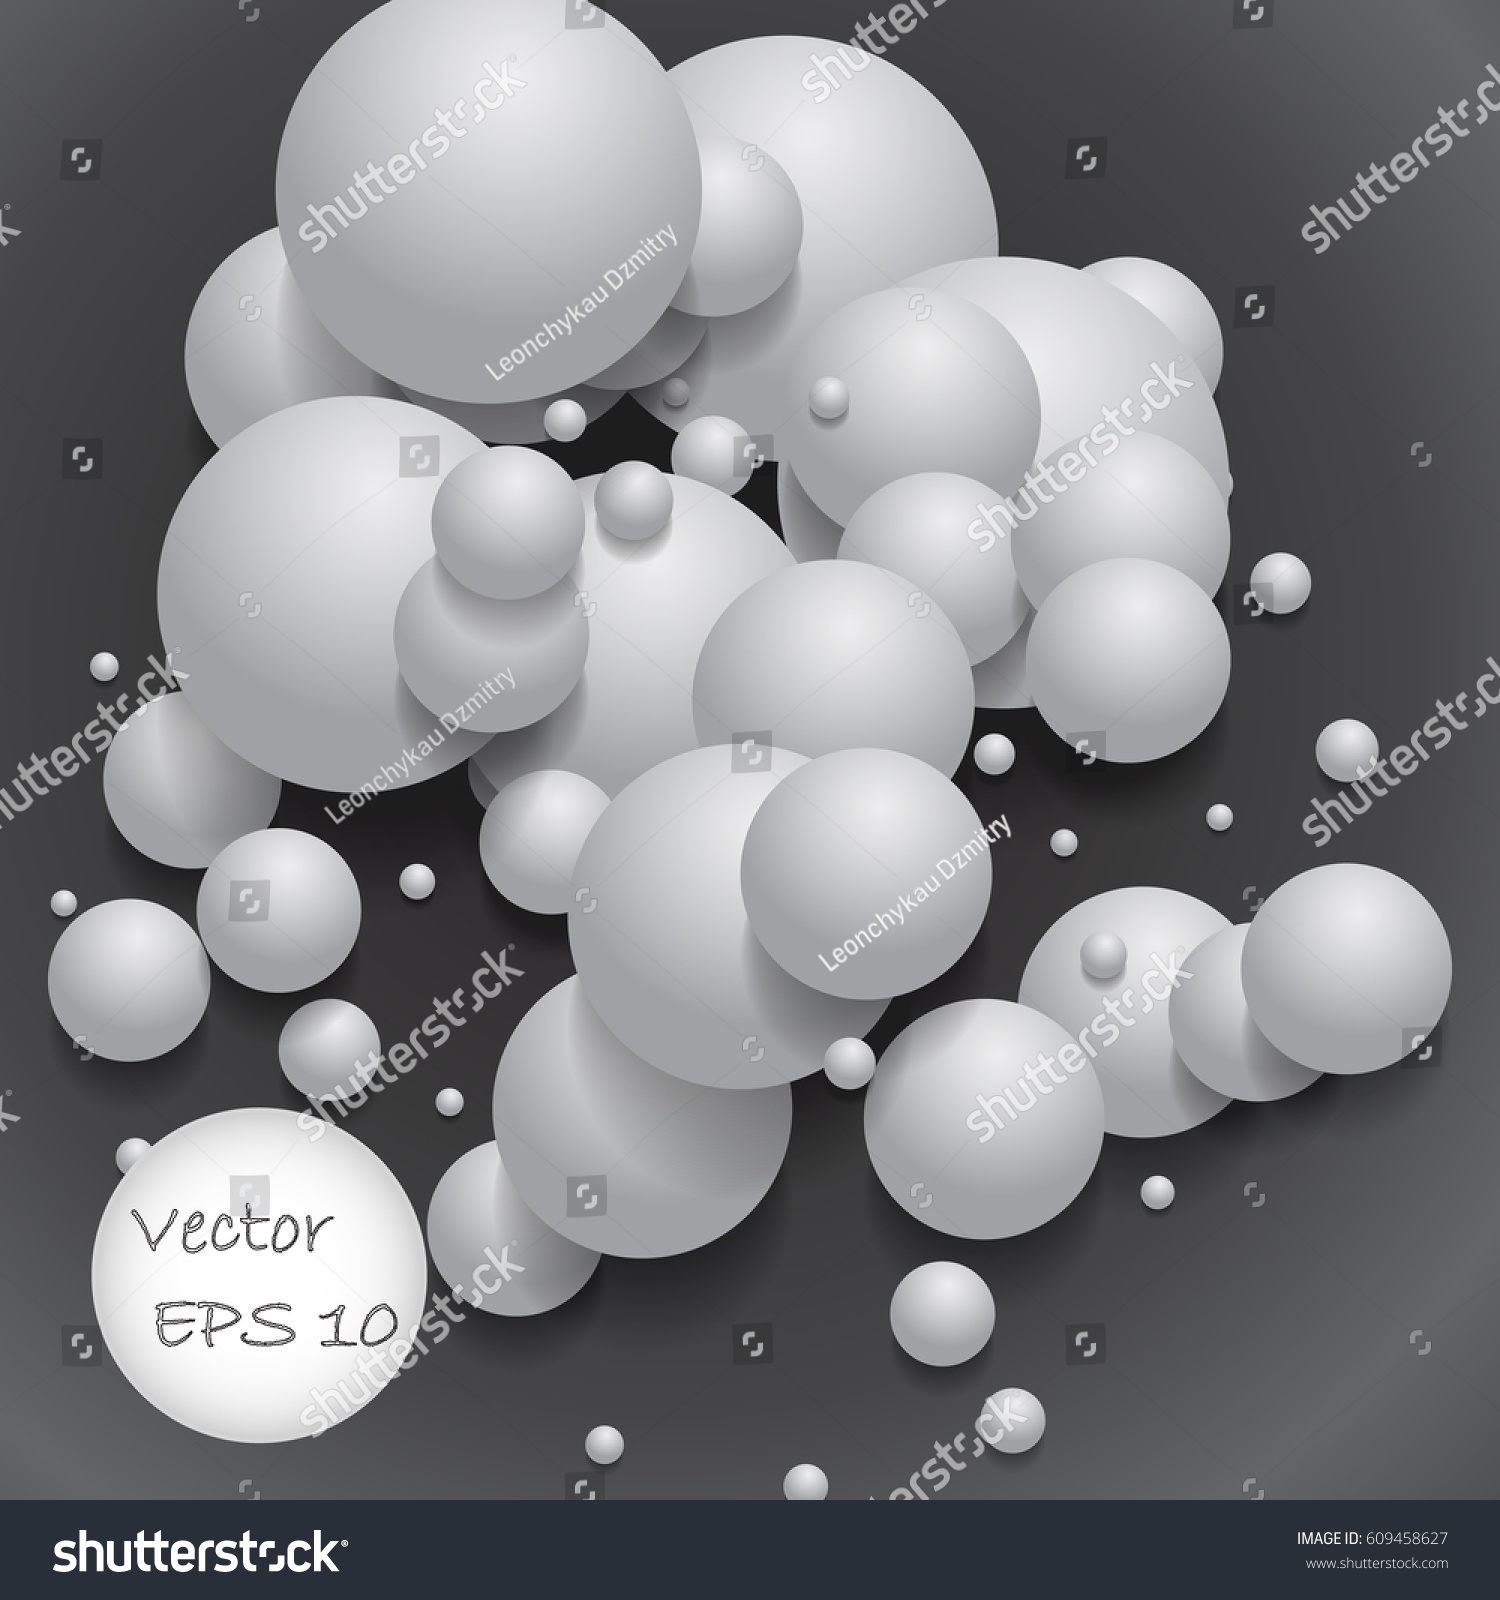 Ball White Spheres Abstract 3d Render Stock Vector 609458627 ...